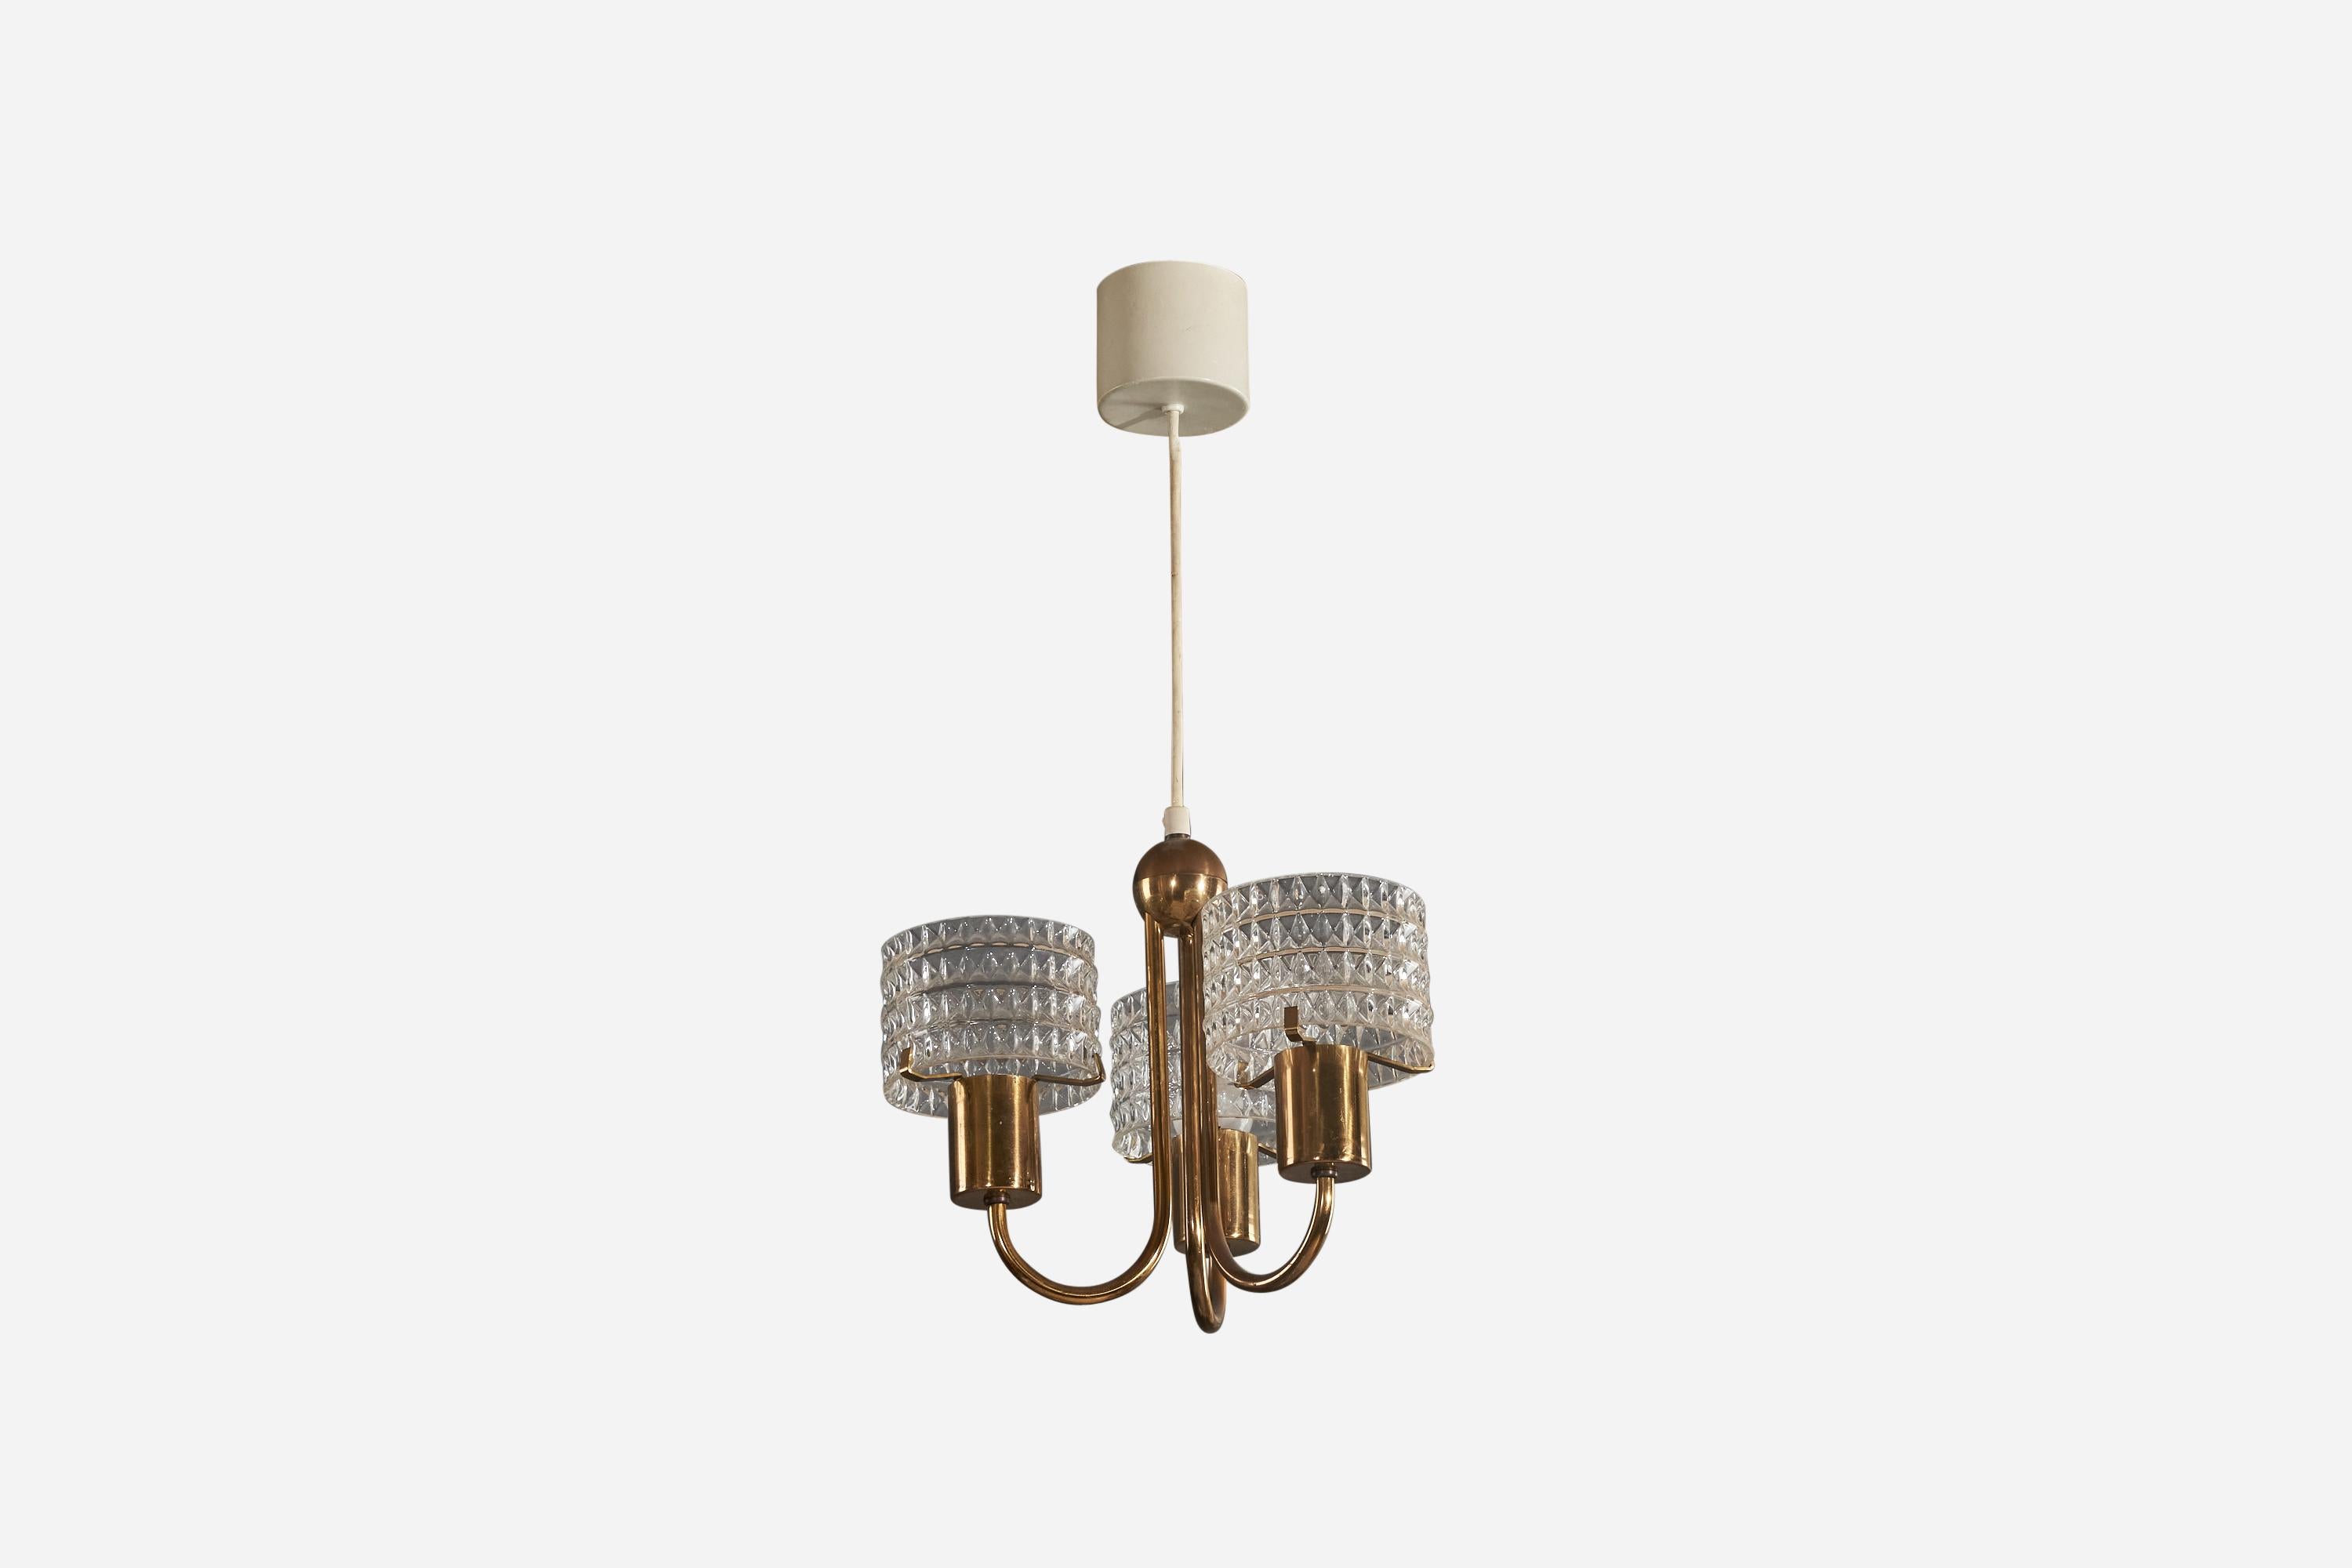 A brass and glass, three-armed chandelier designed and produced in Sweden, 1940s. 

Canopy Dimensions (inches): 2.75 x 3.31 x 3.31 (H x W x D).